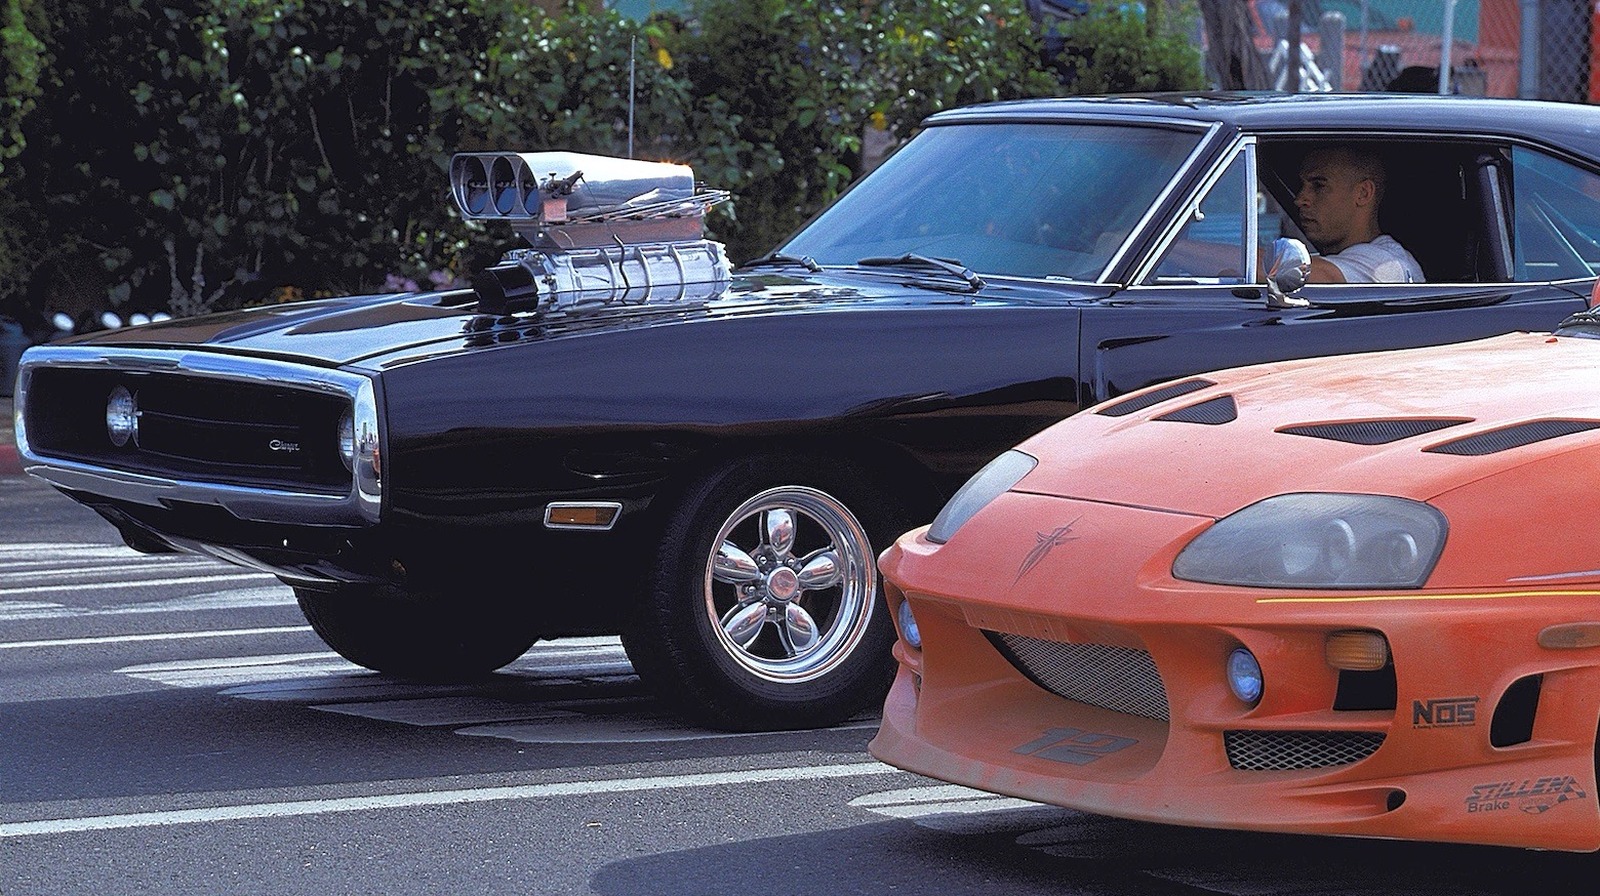 Dom's Charger from The Fast and The Furious - Fast and Furious Facts